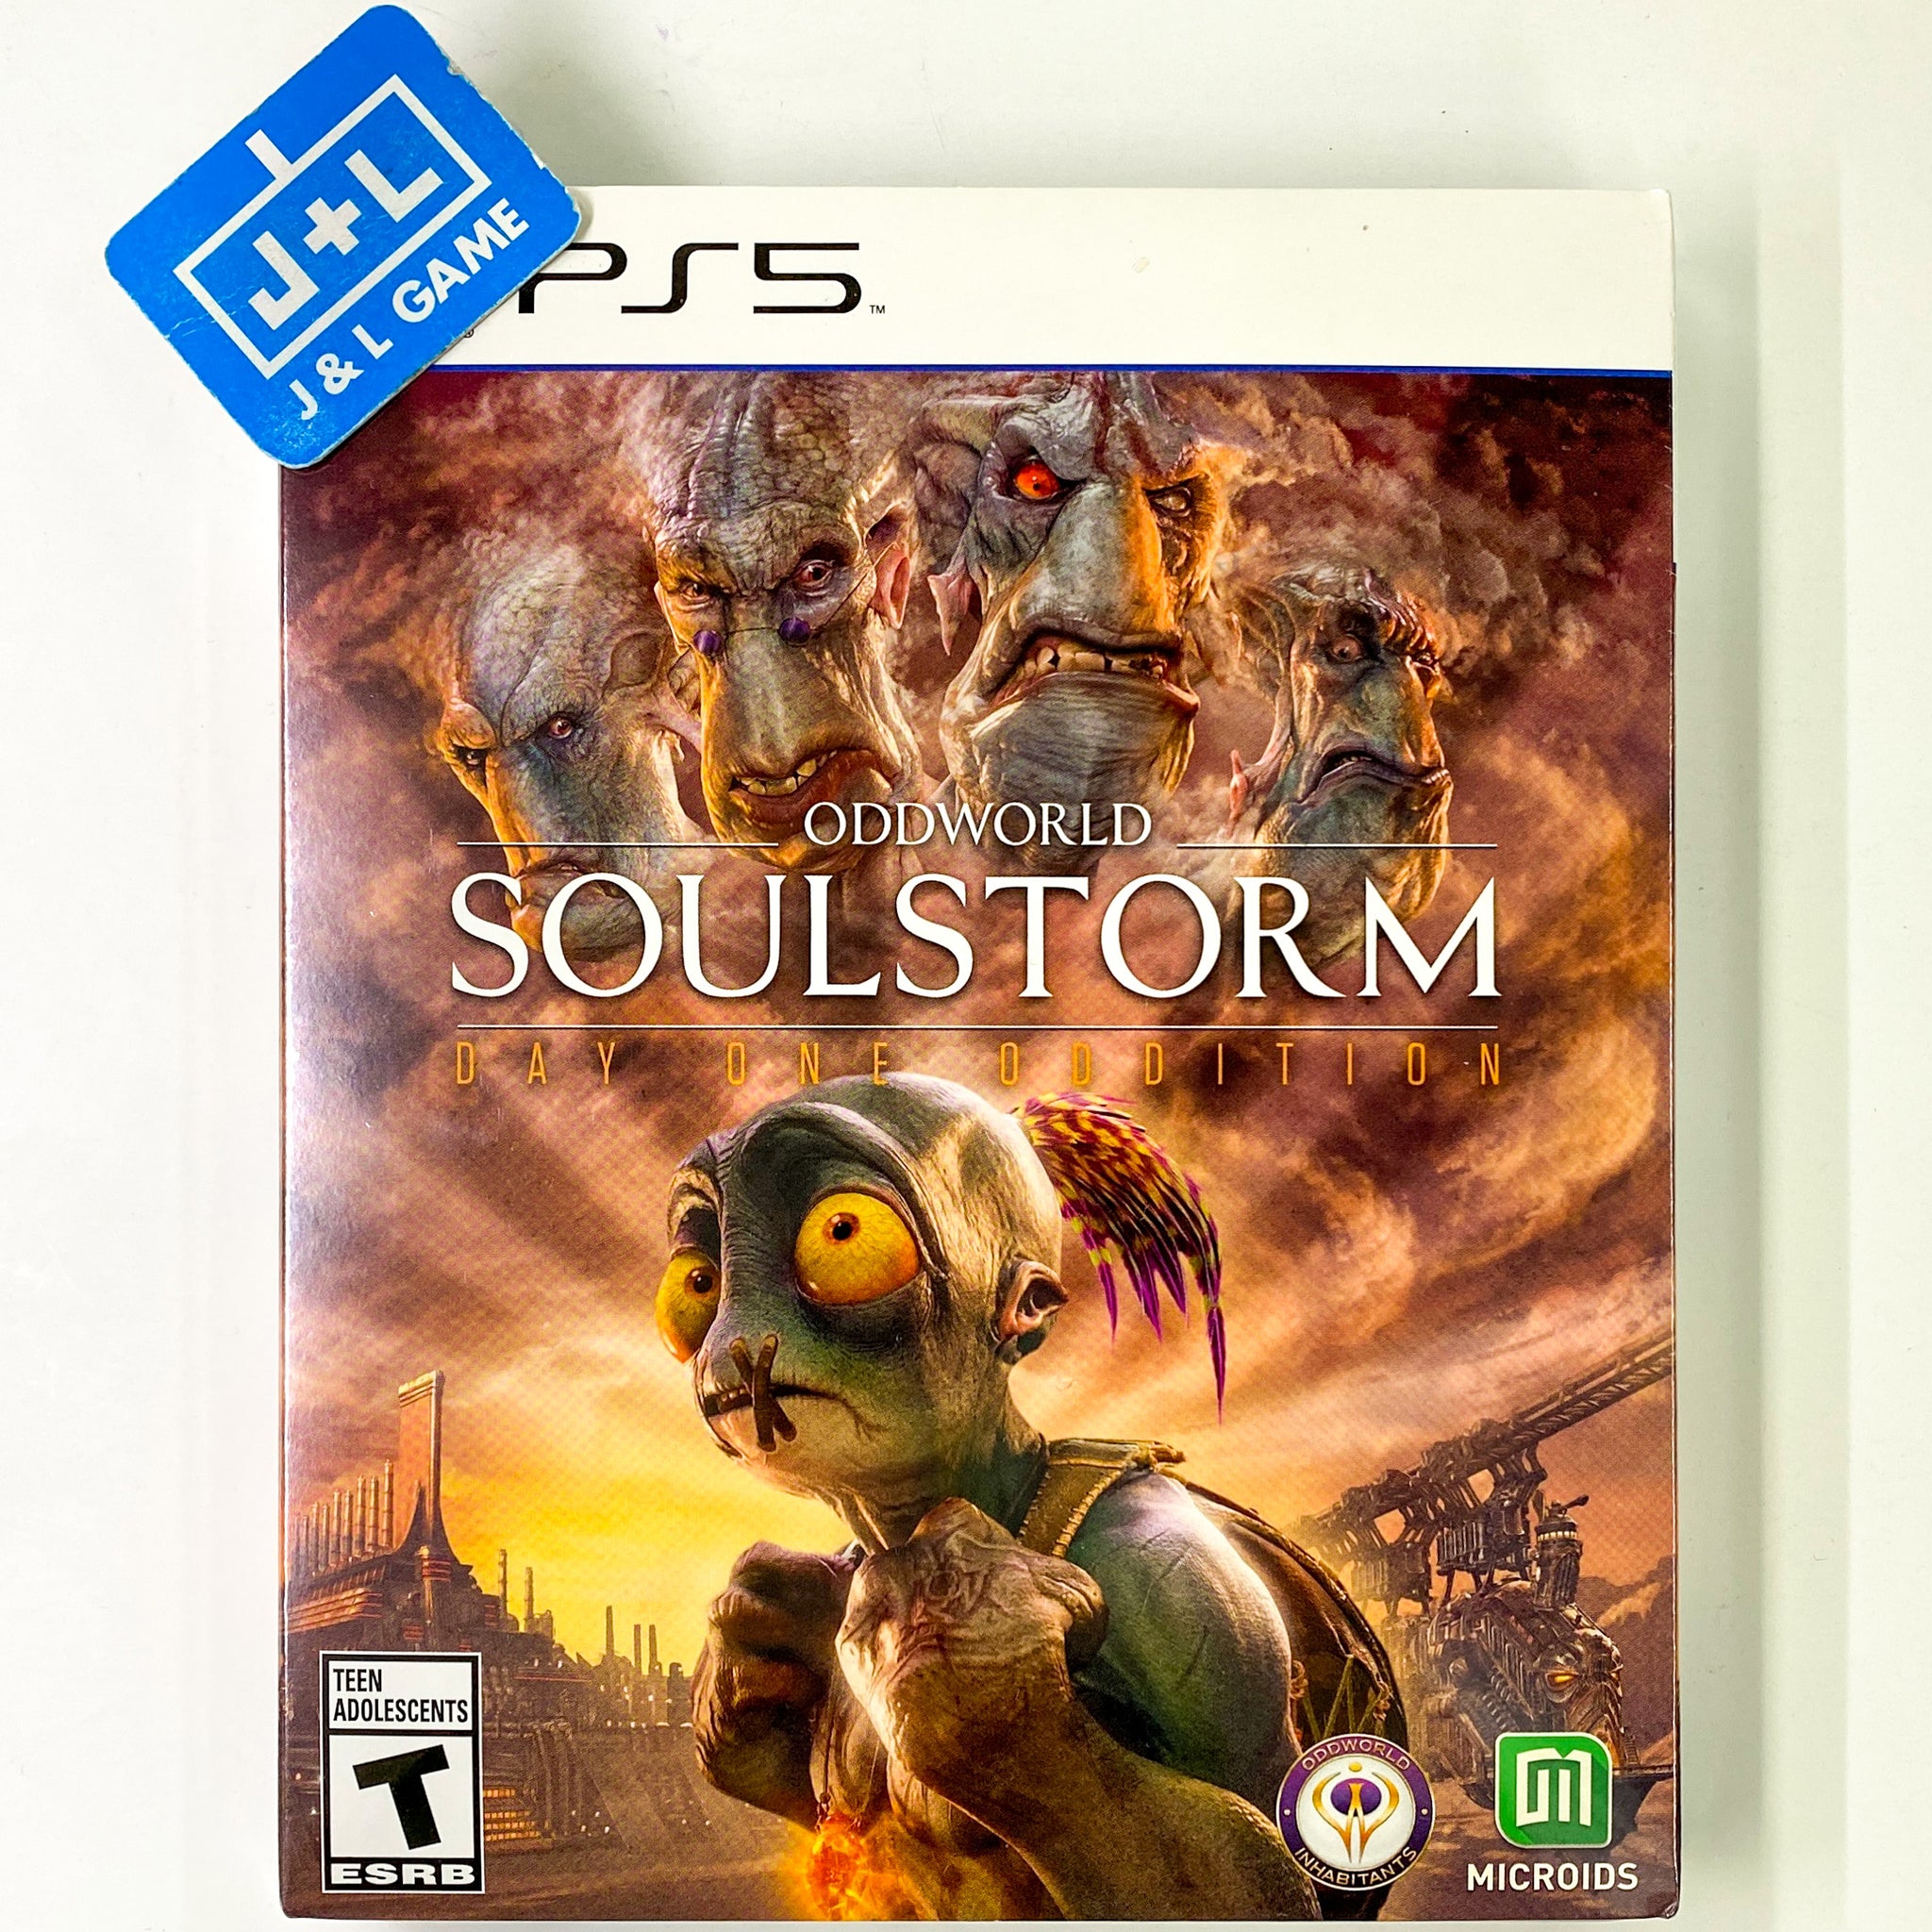 Oddworld: Soulstorm Day One Oddition - (PS5) PlayStation 5 Video Games Microids   